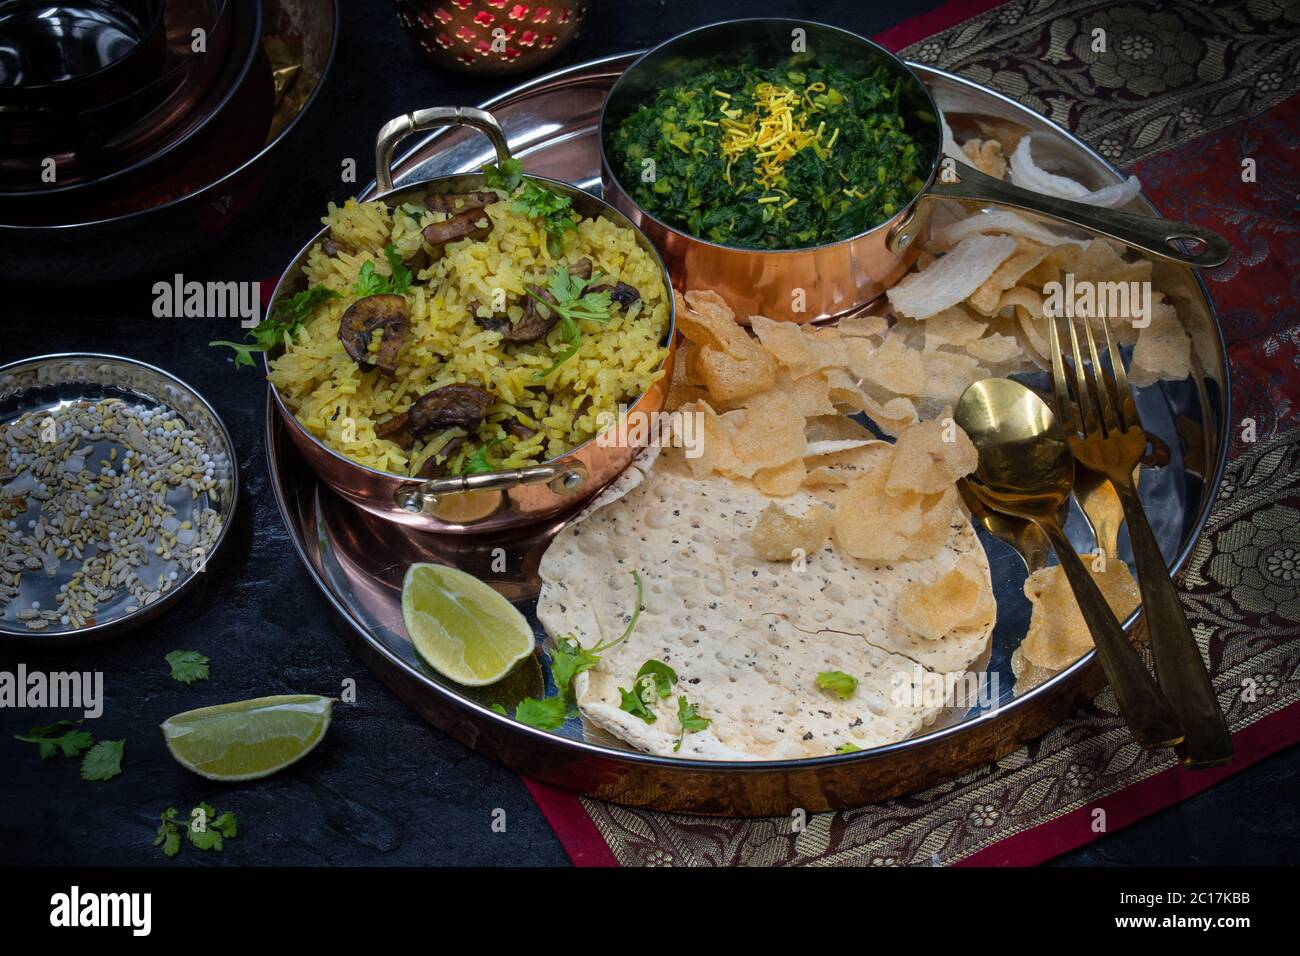 Vegan North Indian mushroom pilaf and spinach served in traditional bowls Stock Photo